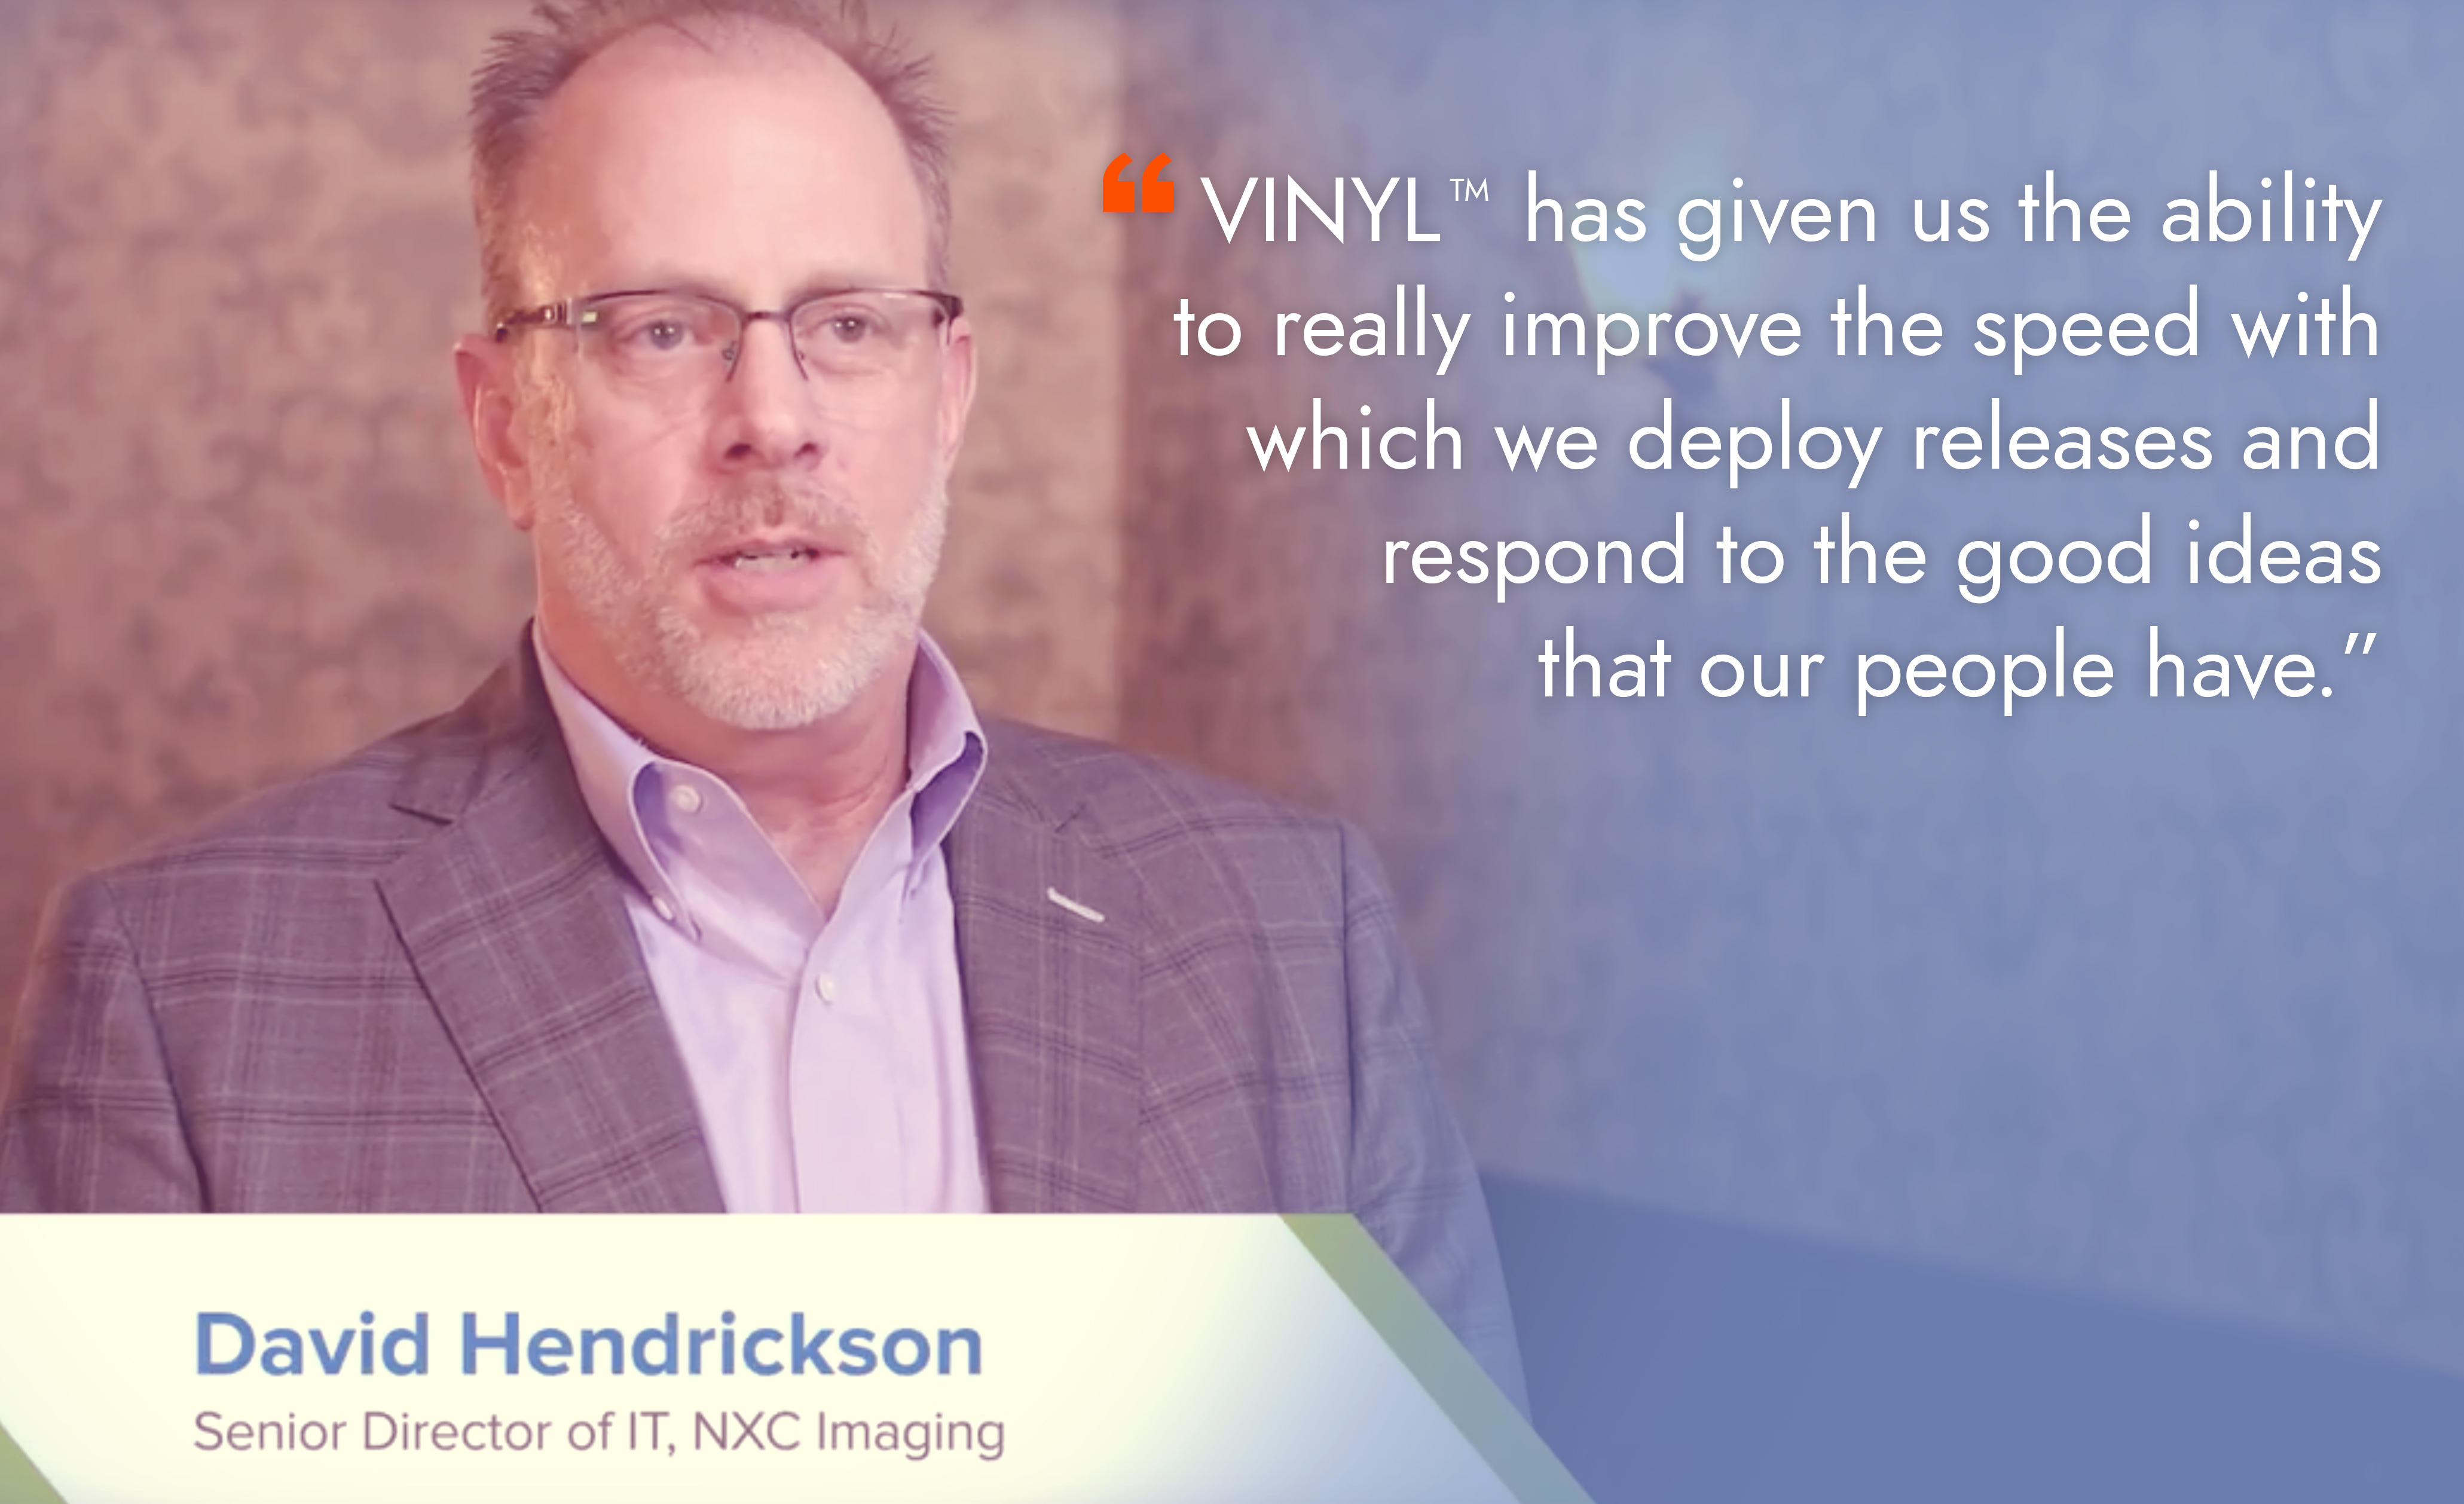 Charles Nardi on LinkedIn: Excellent Review of Zudy VINYL by a Real User